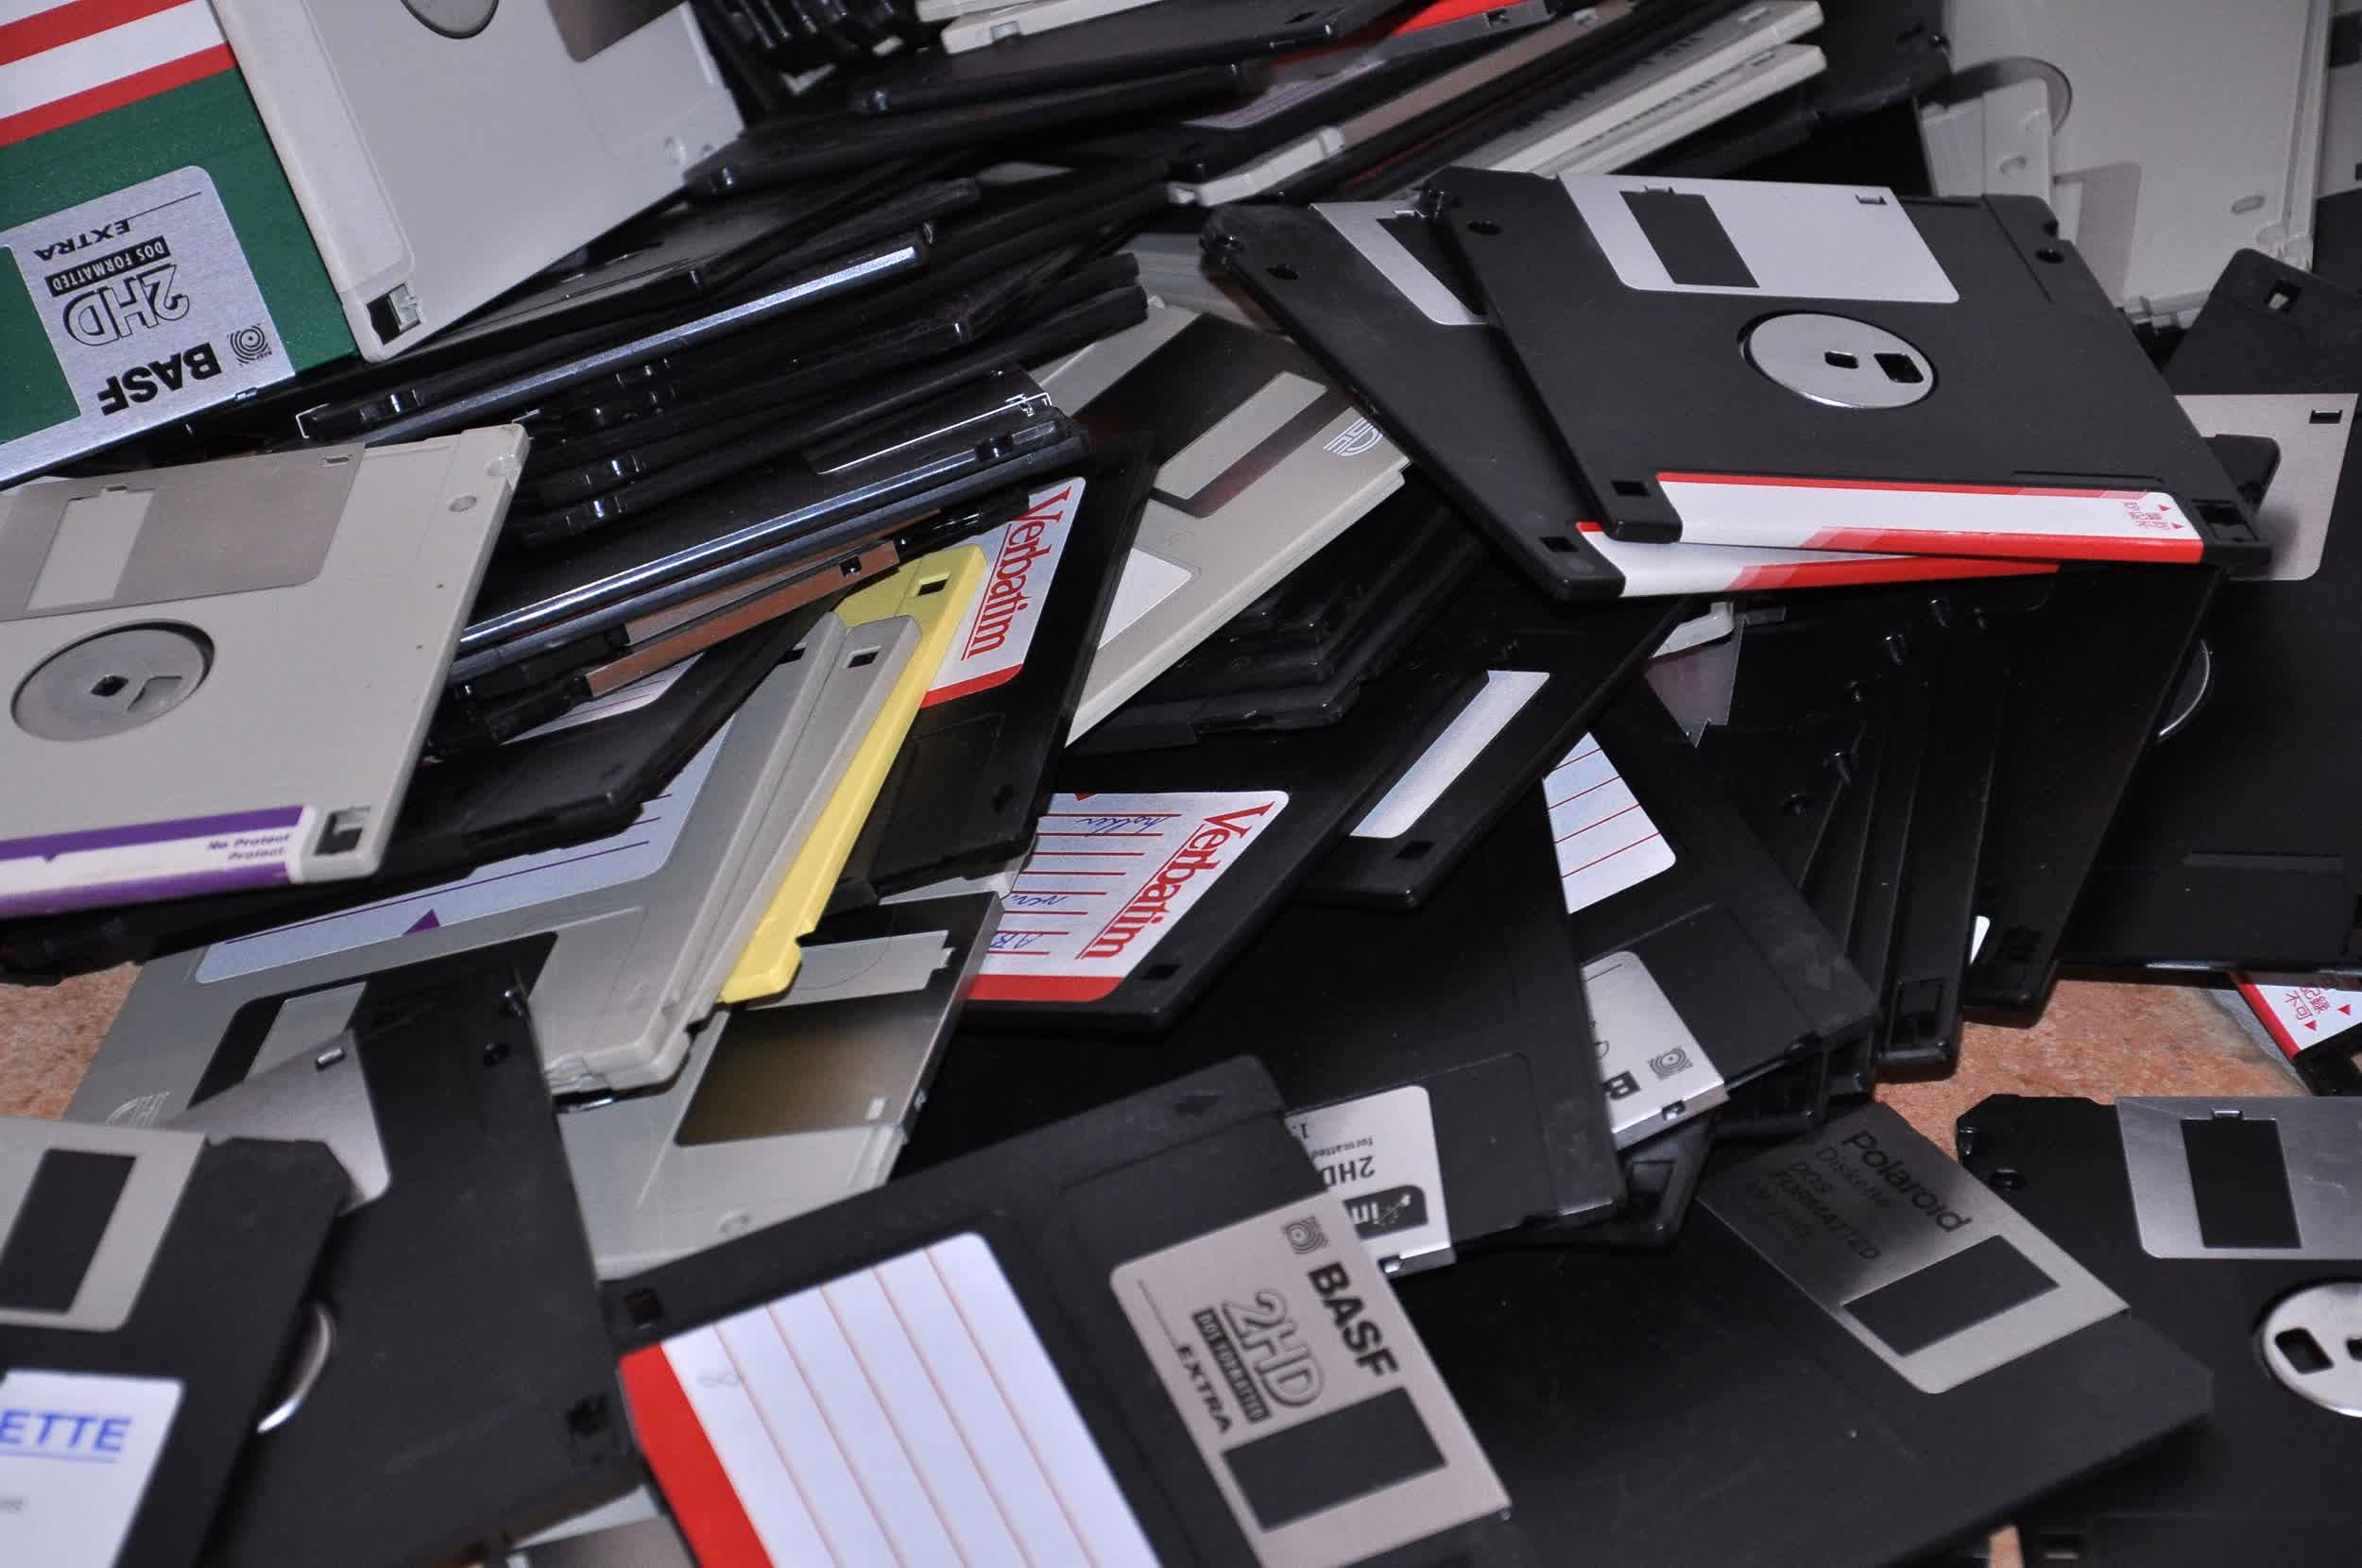 The last man selling floppy disks says he still receives orders from airlines